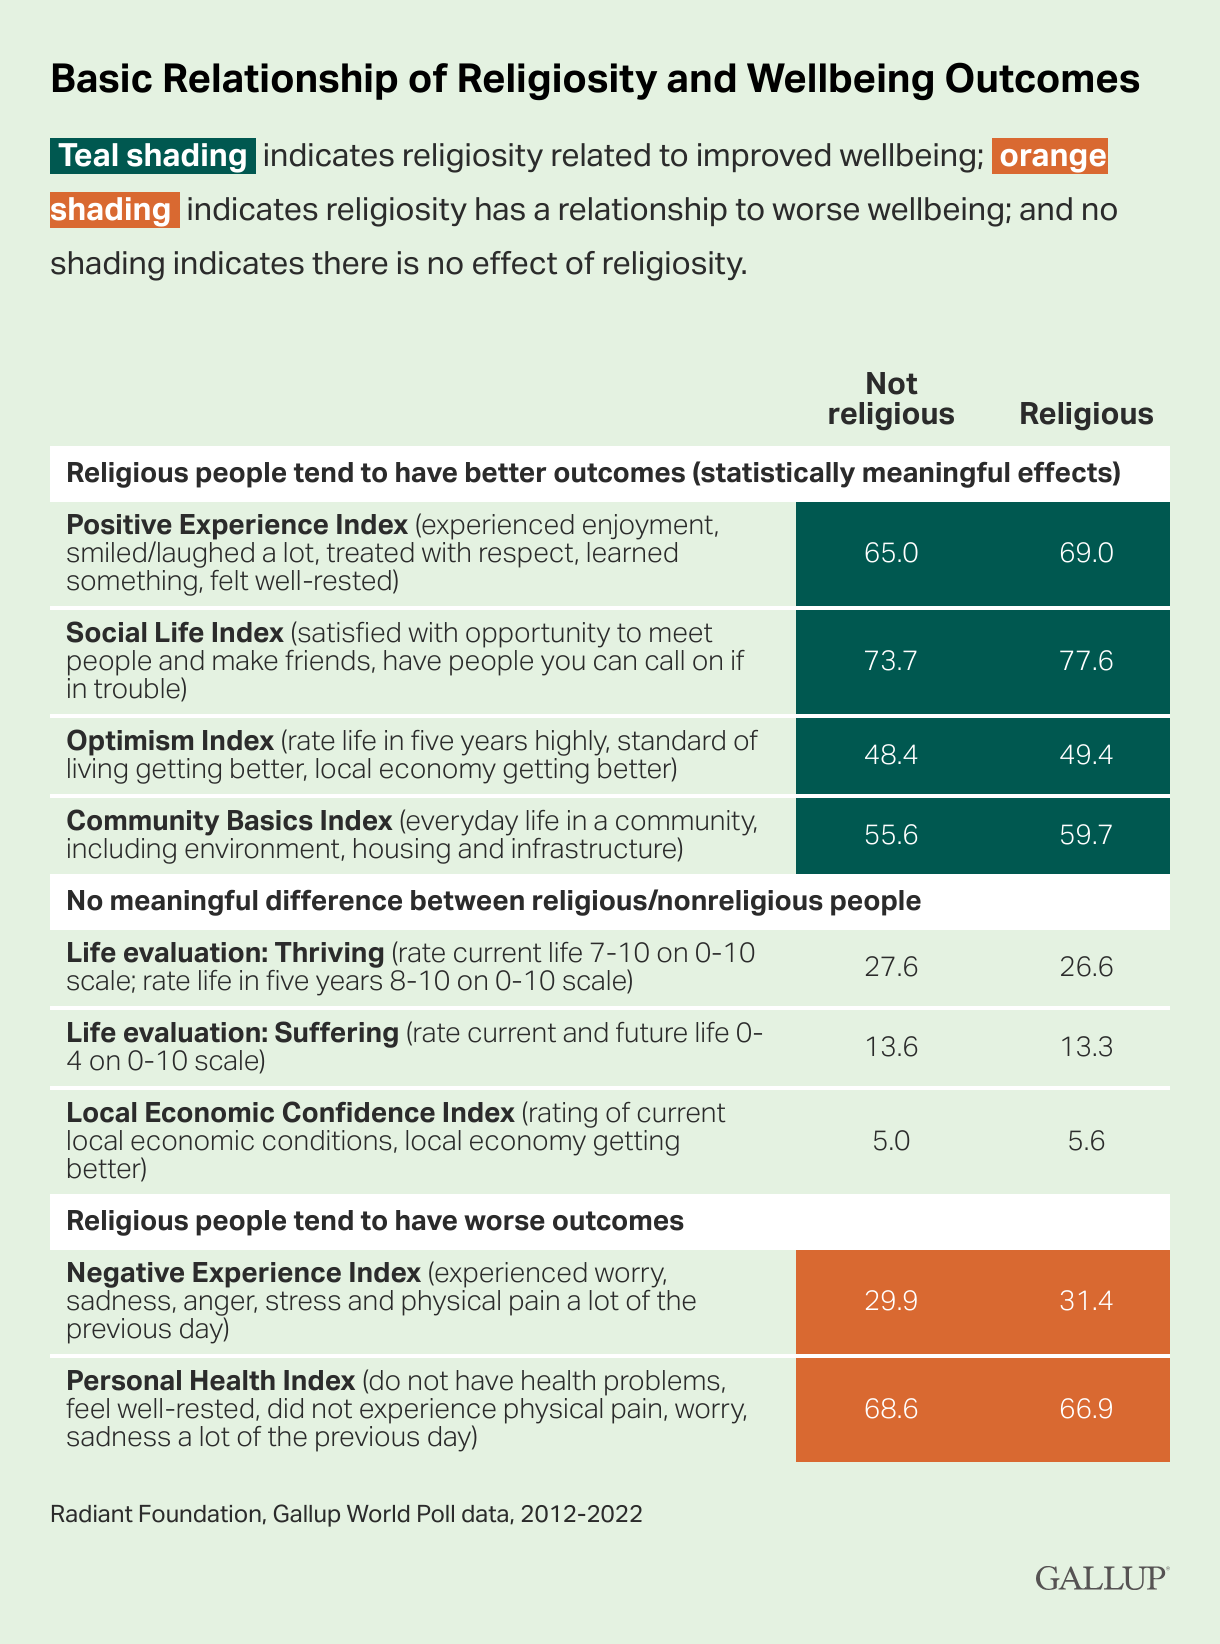 Basic Relationship of Religiosity and Wellbeing Outcomes